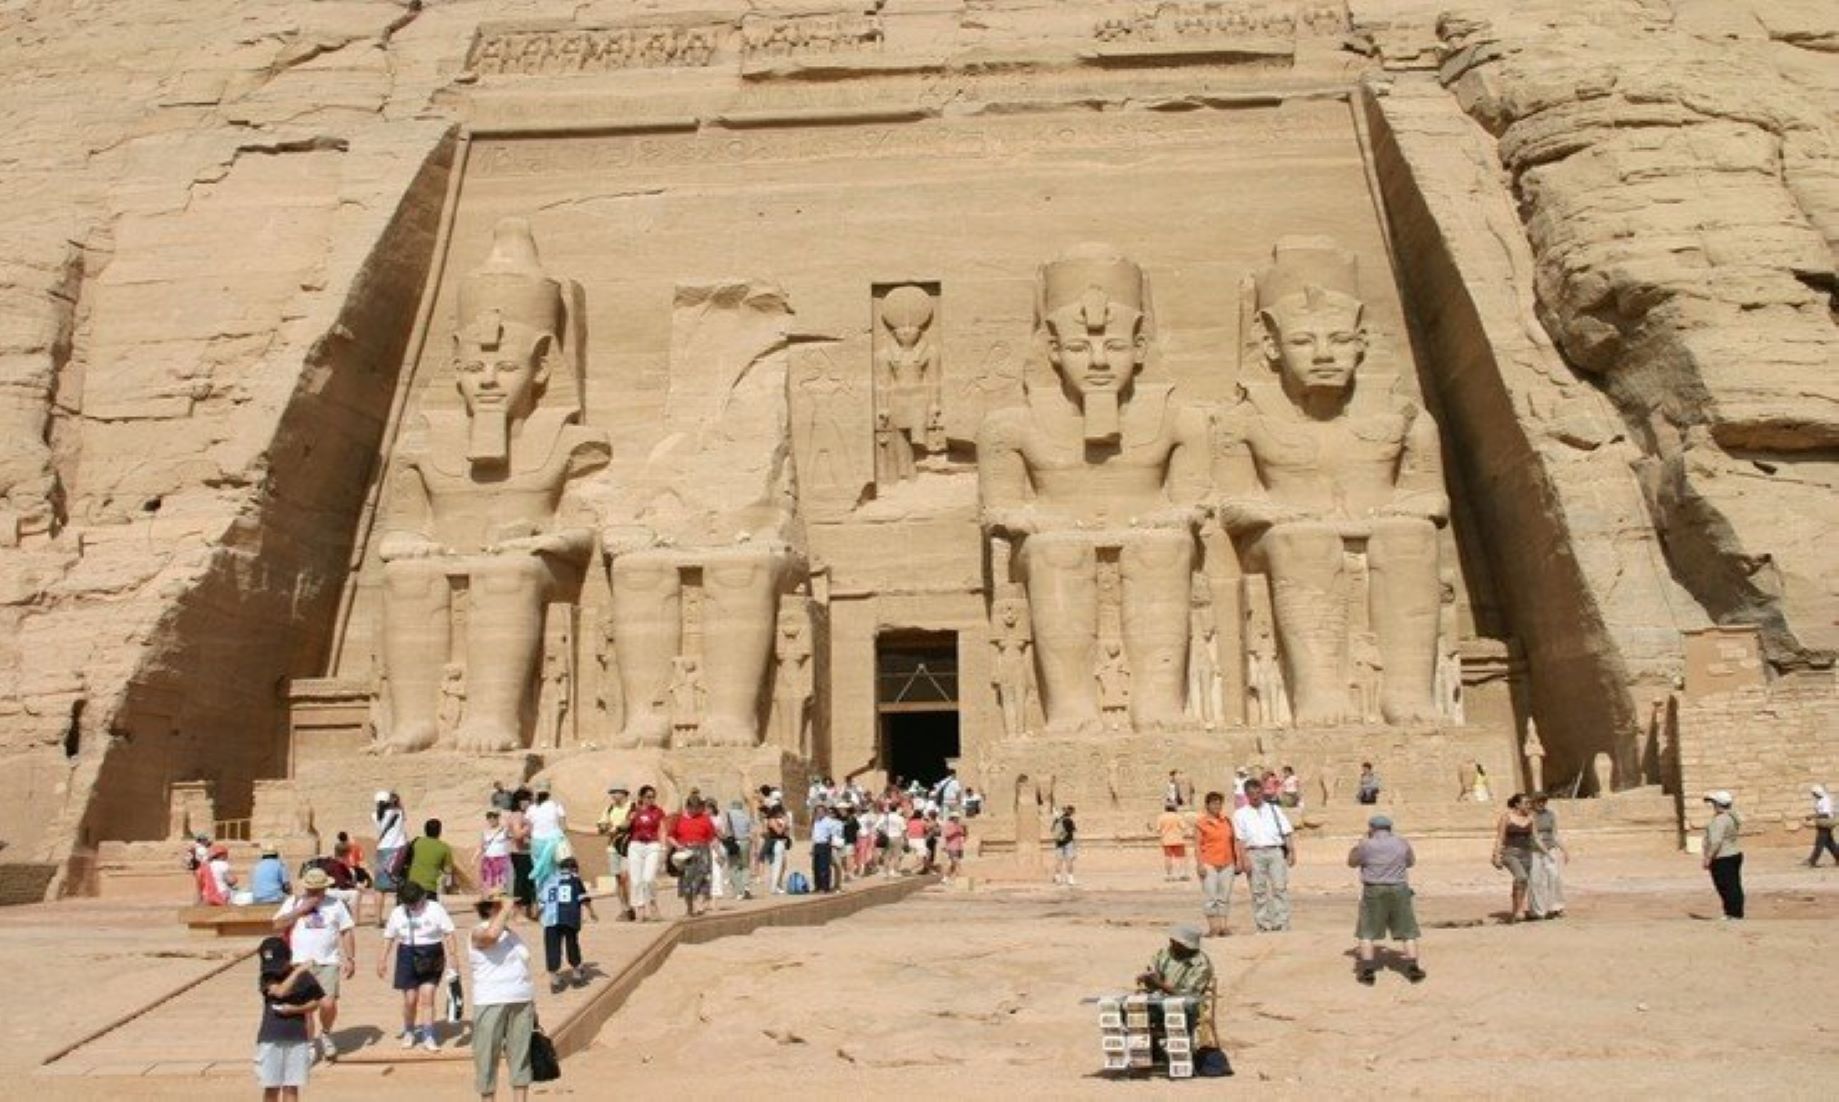 Egypt’s Tourism Revenues Hit Record High In Q1 Of FY 2022/23